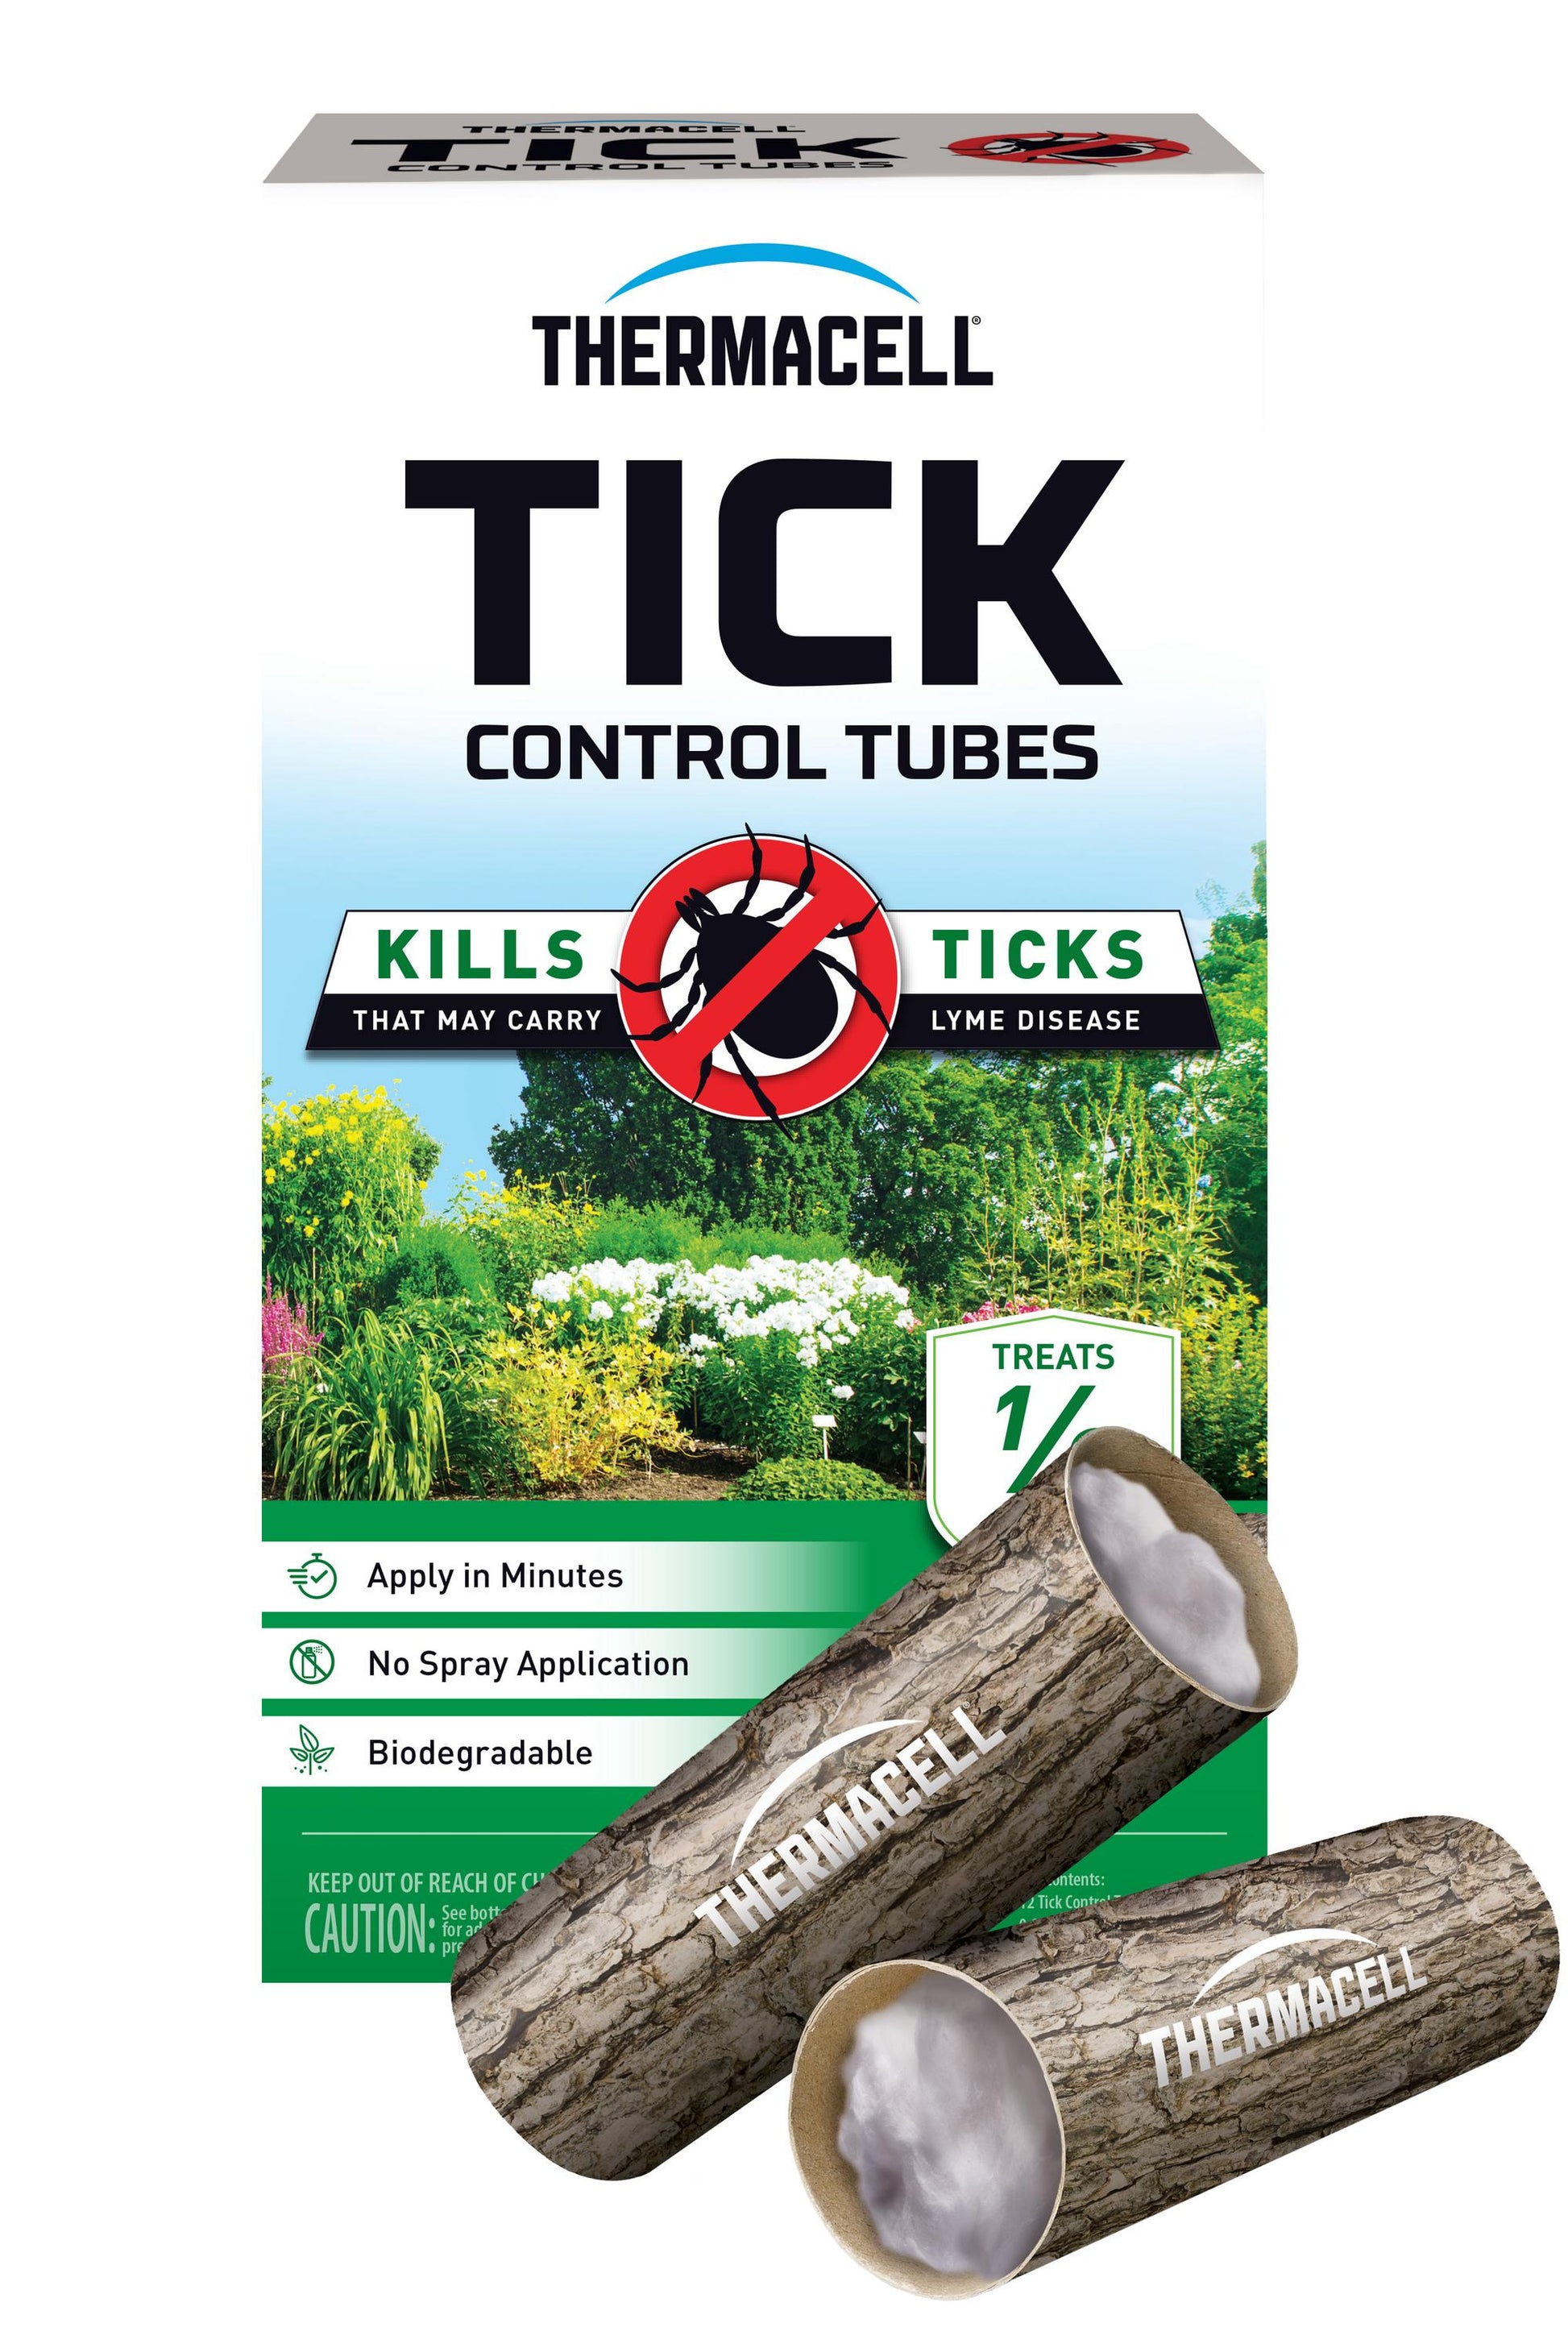 Thermacell Tick Control Cubes - KBM Outdoors